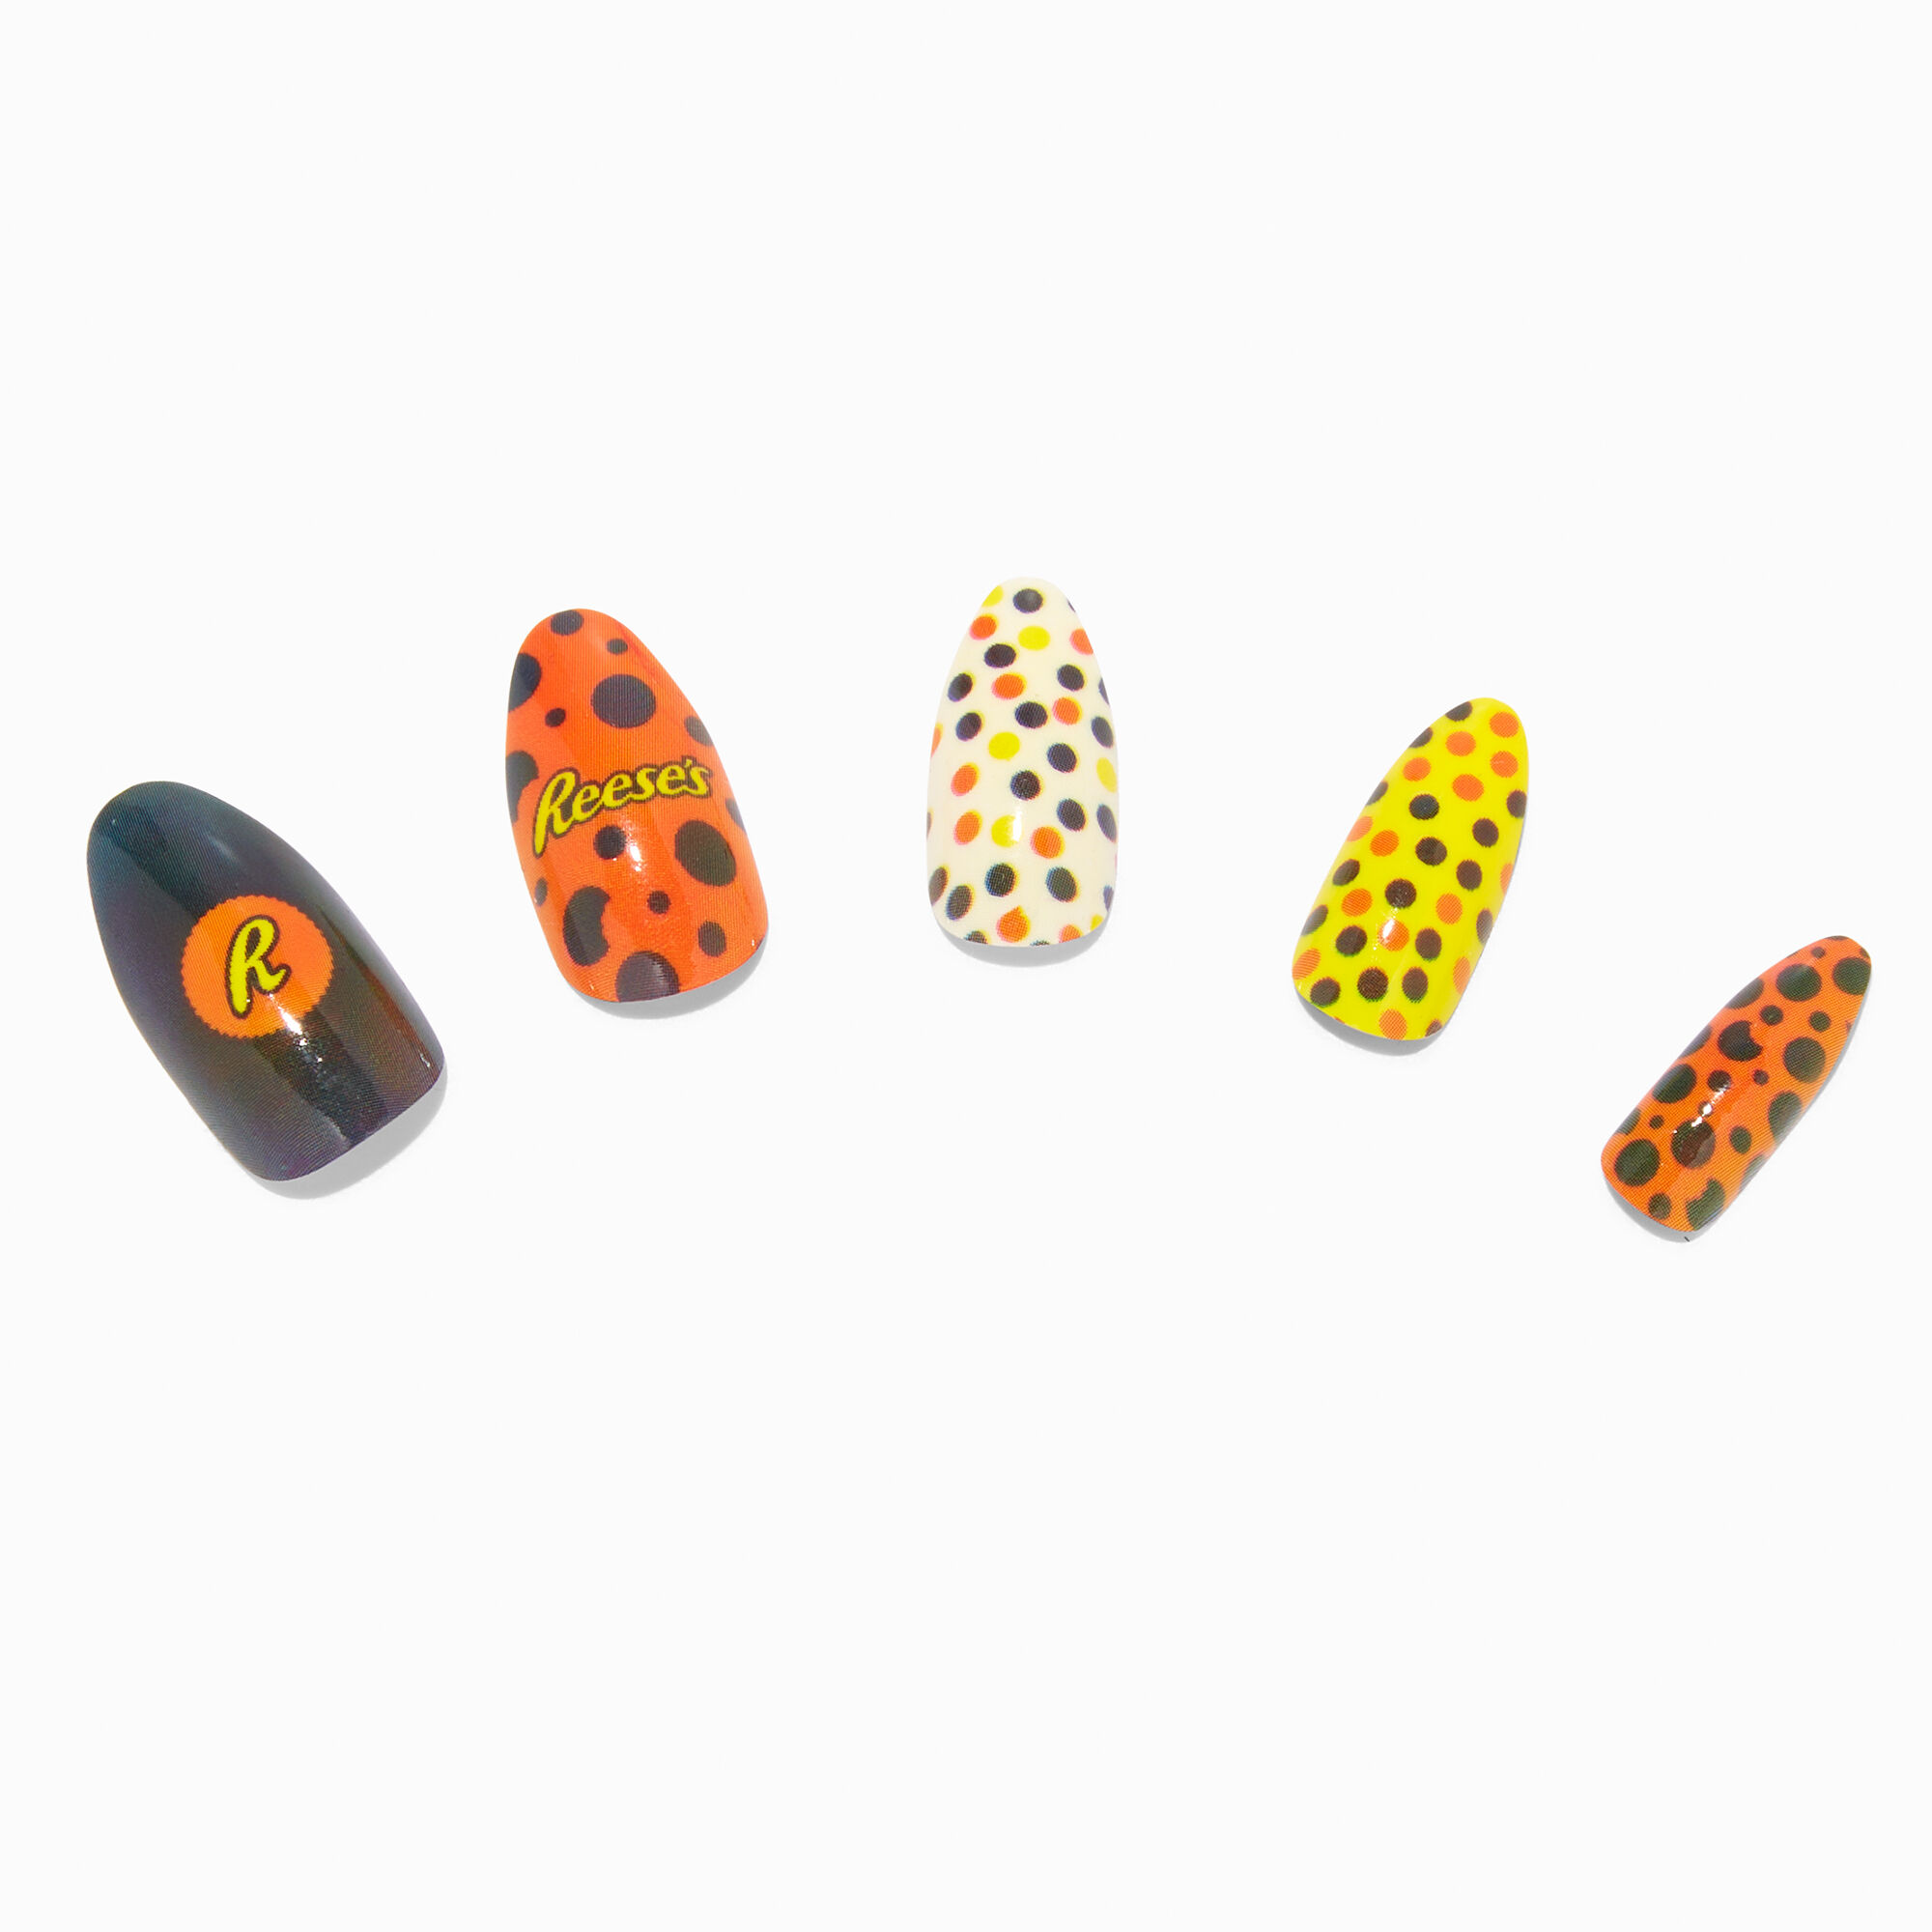 This 90s-inspired nail salon offers hand-painted nail art - YouTube